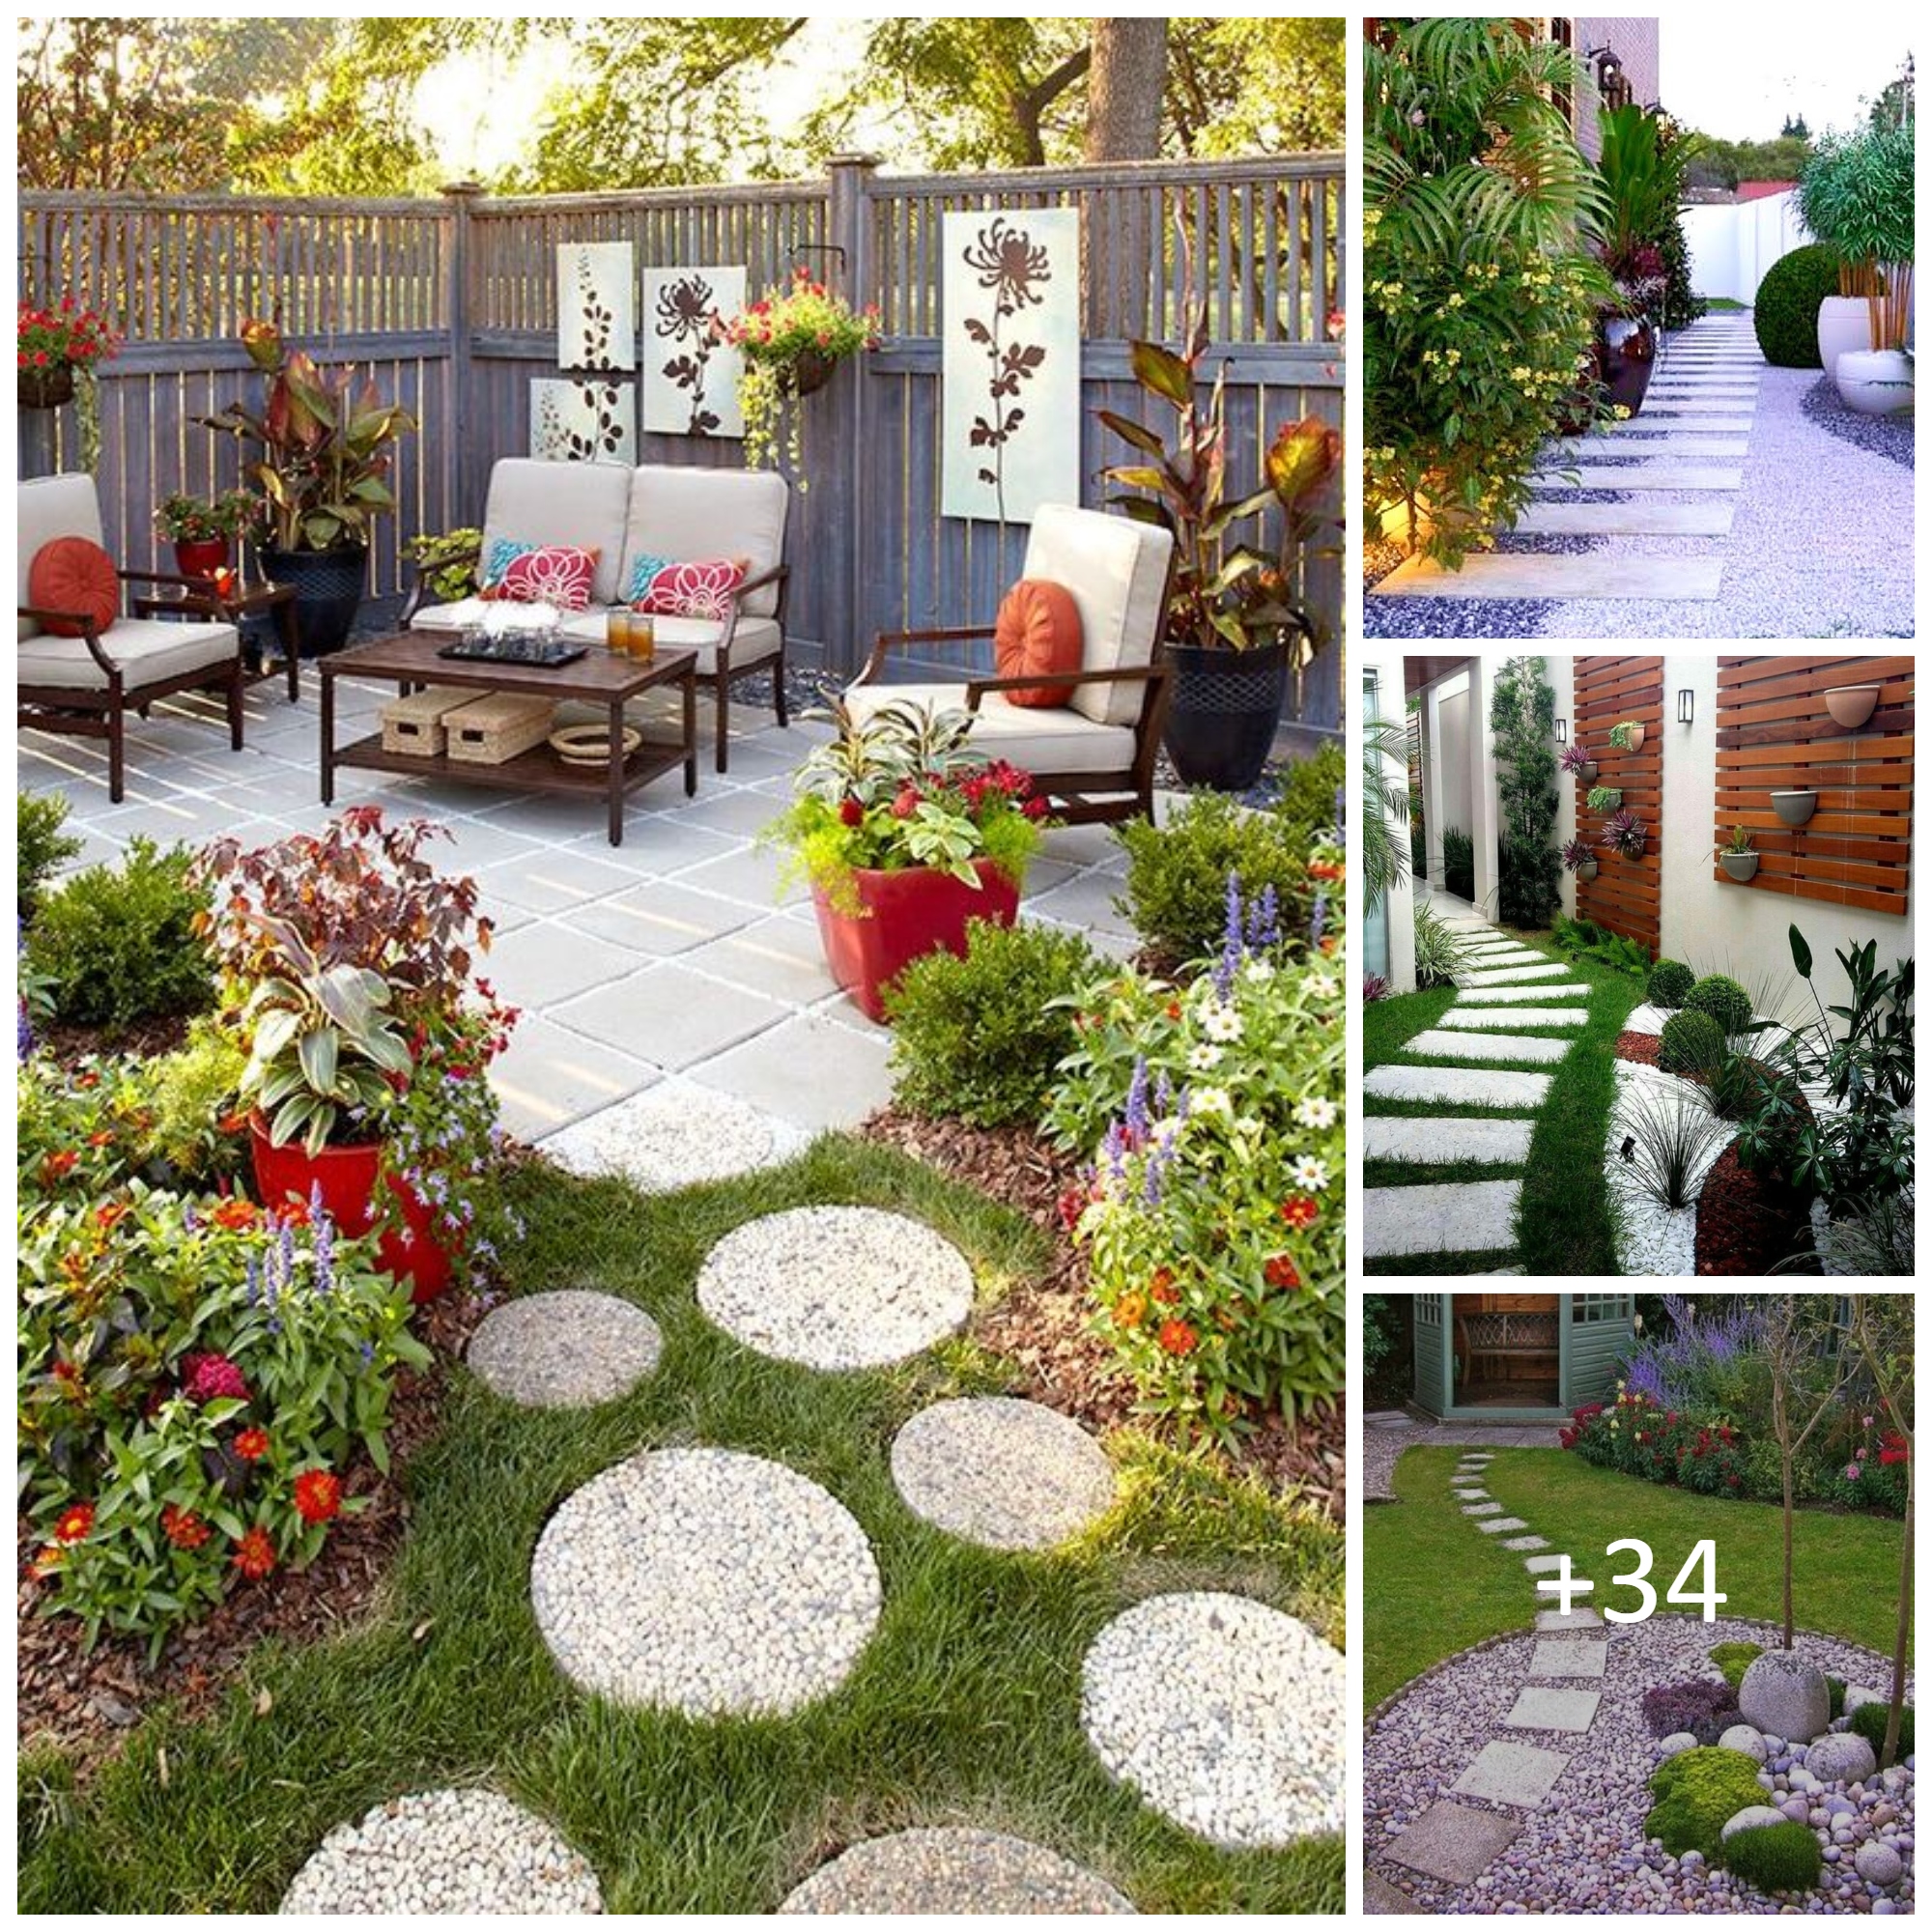 Landscaping Ideas to Create an Enchanting Outdoor Space